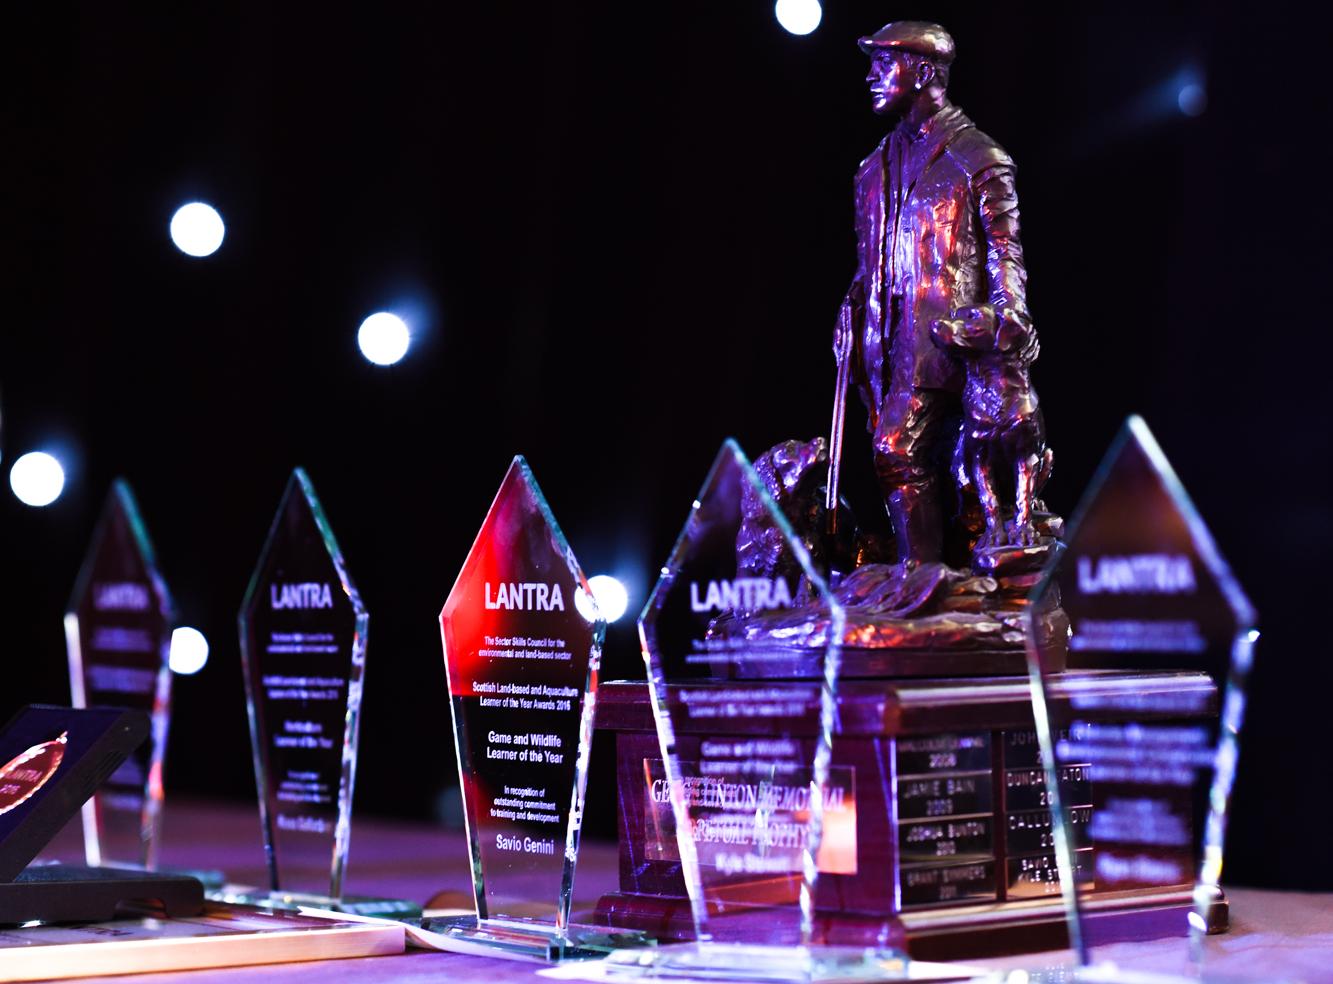 Trophies for Lantra's ALBAS